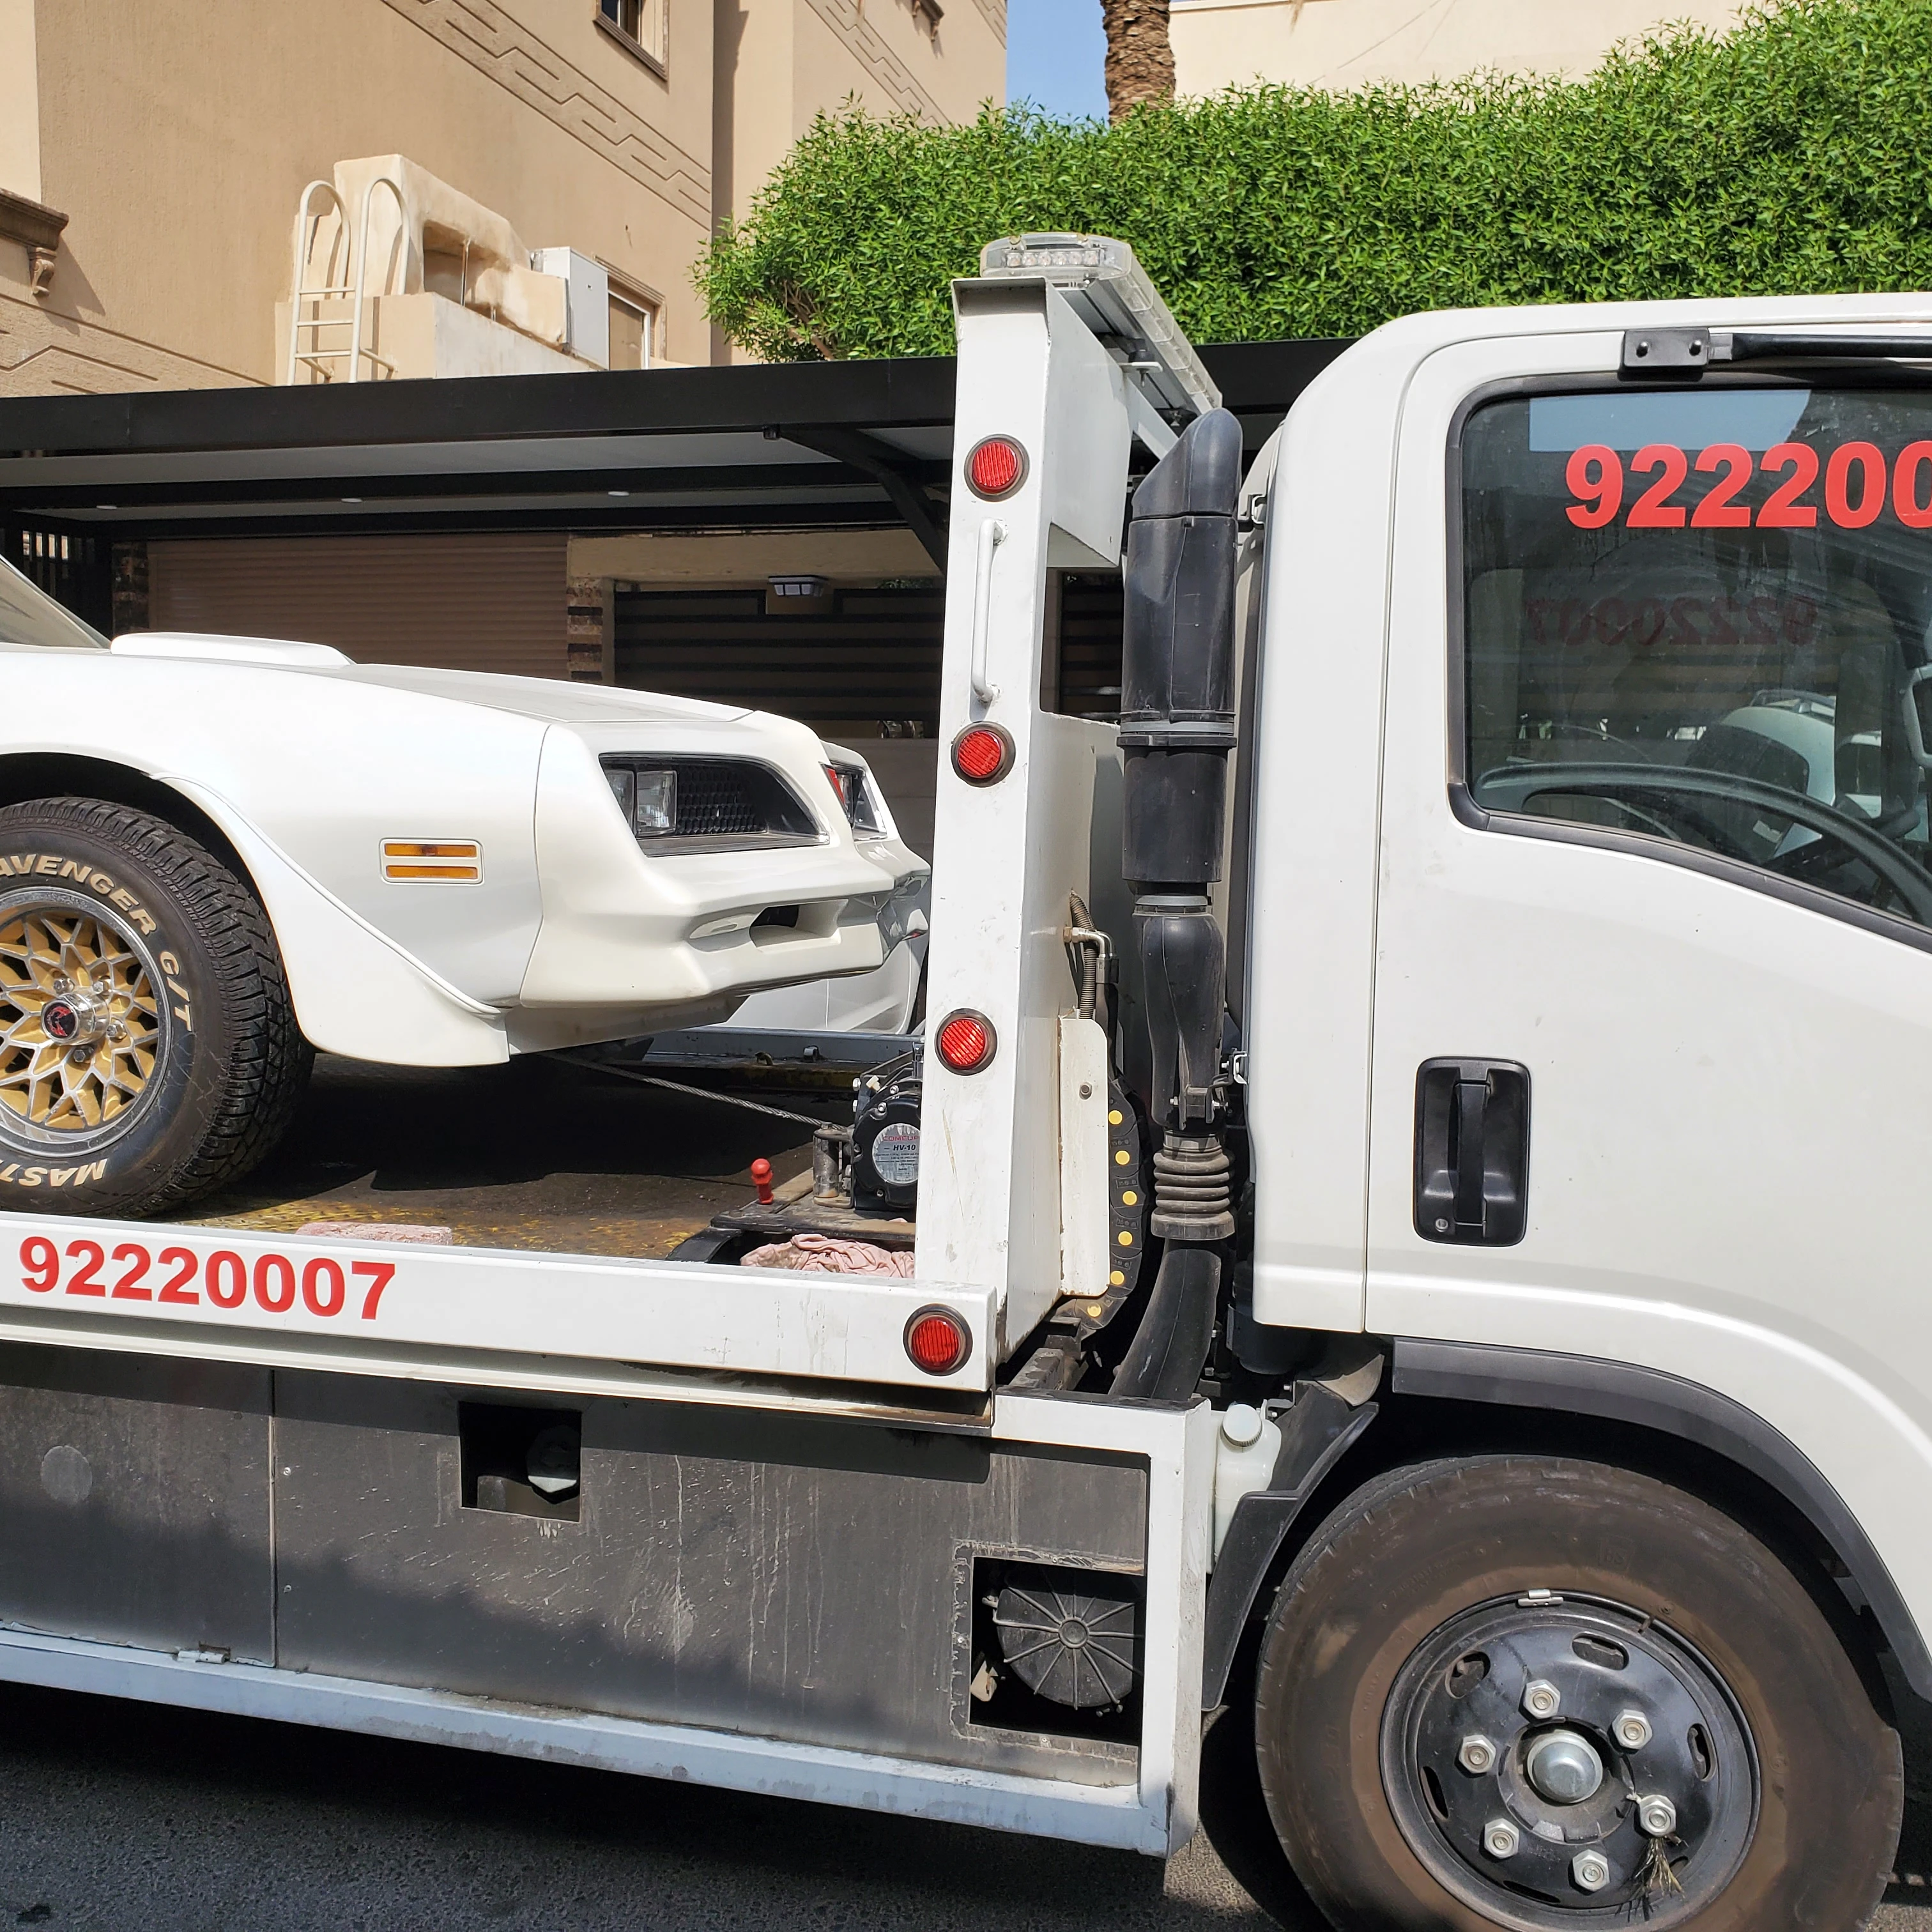 Car towing service in Kuwait 92220007